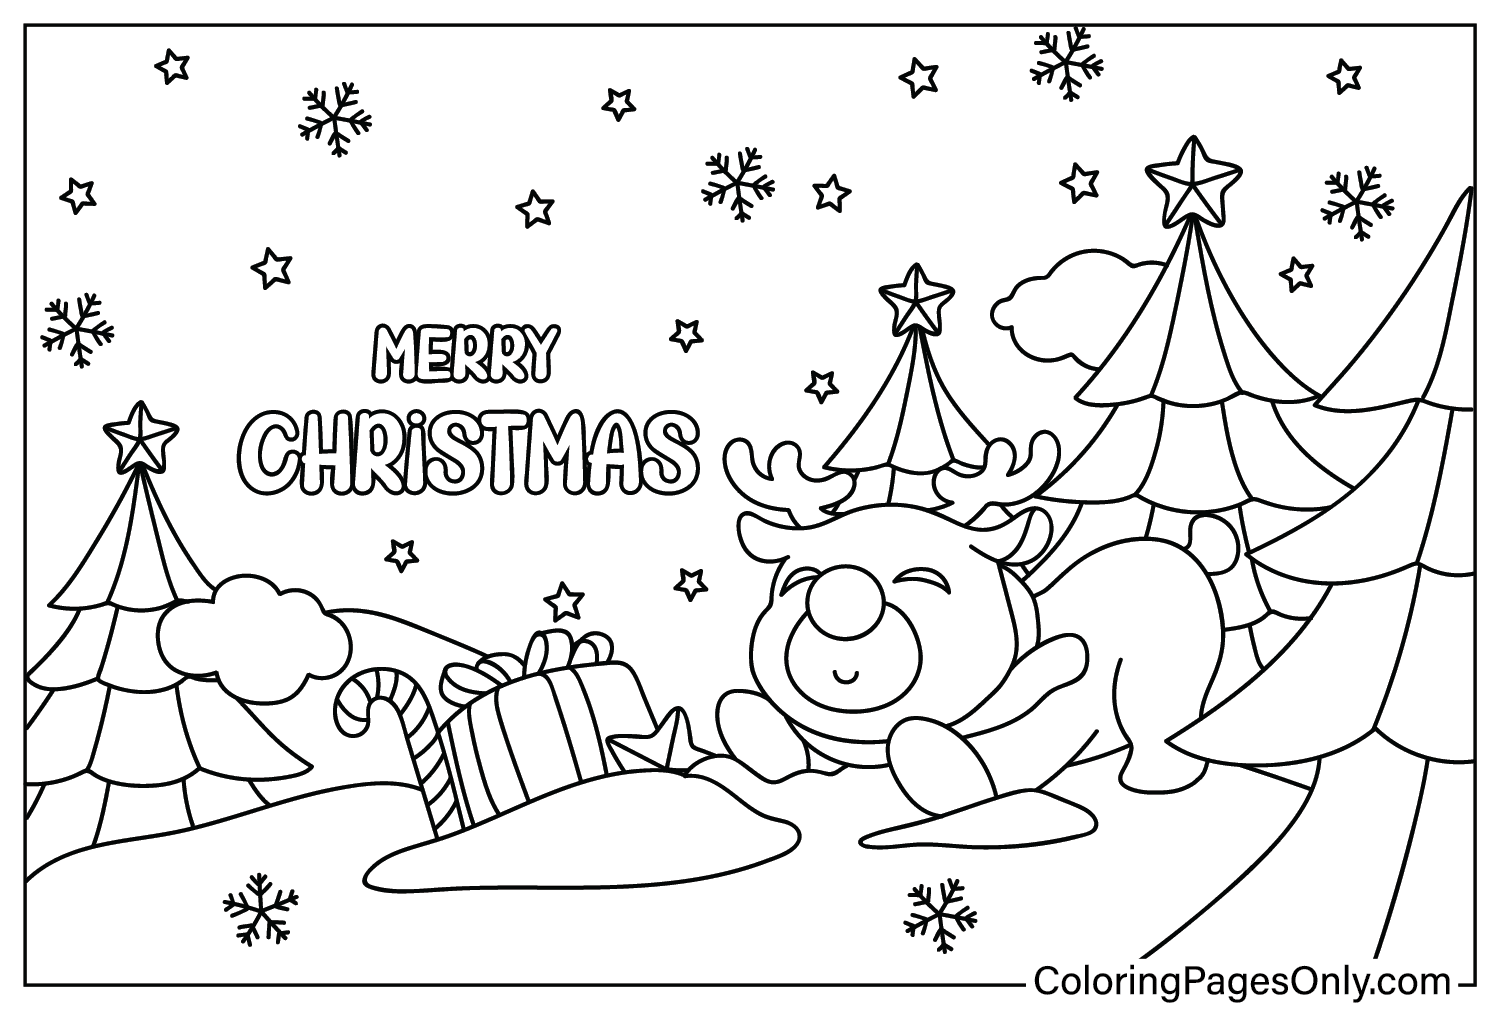 Christmas Wallpaper Coloring Page from Christmas Wallpaper